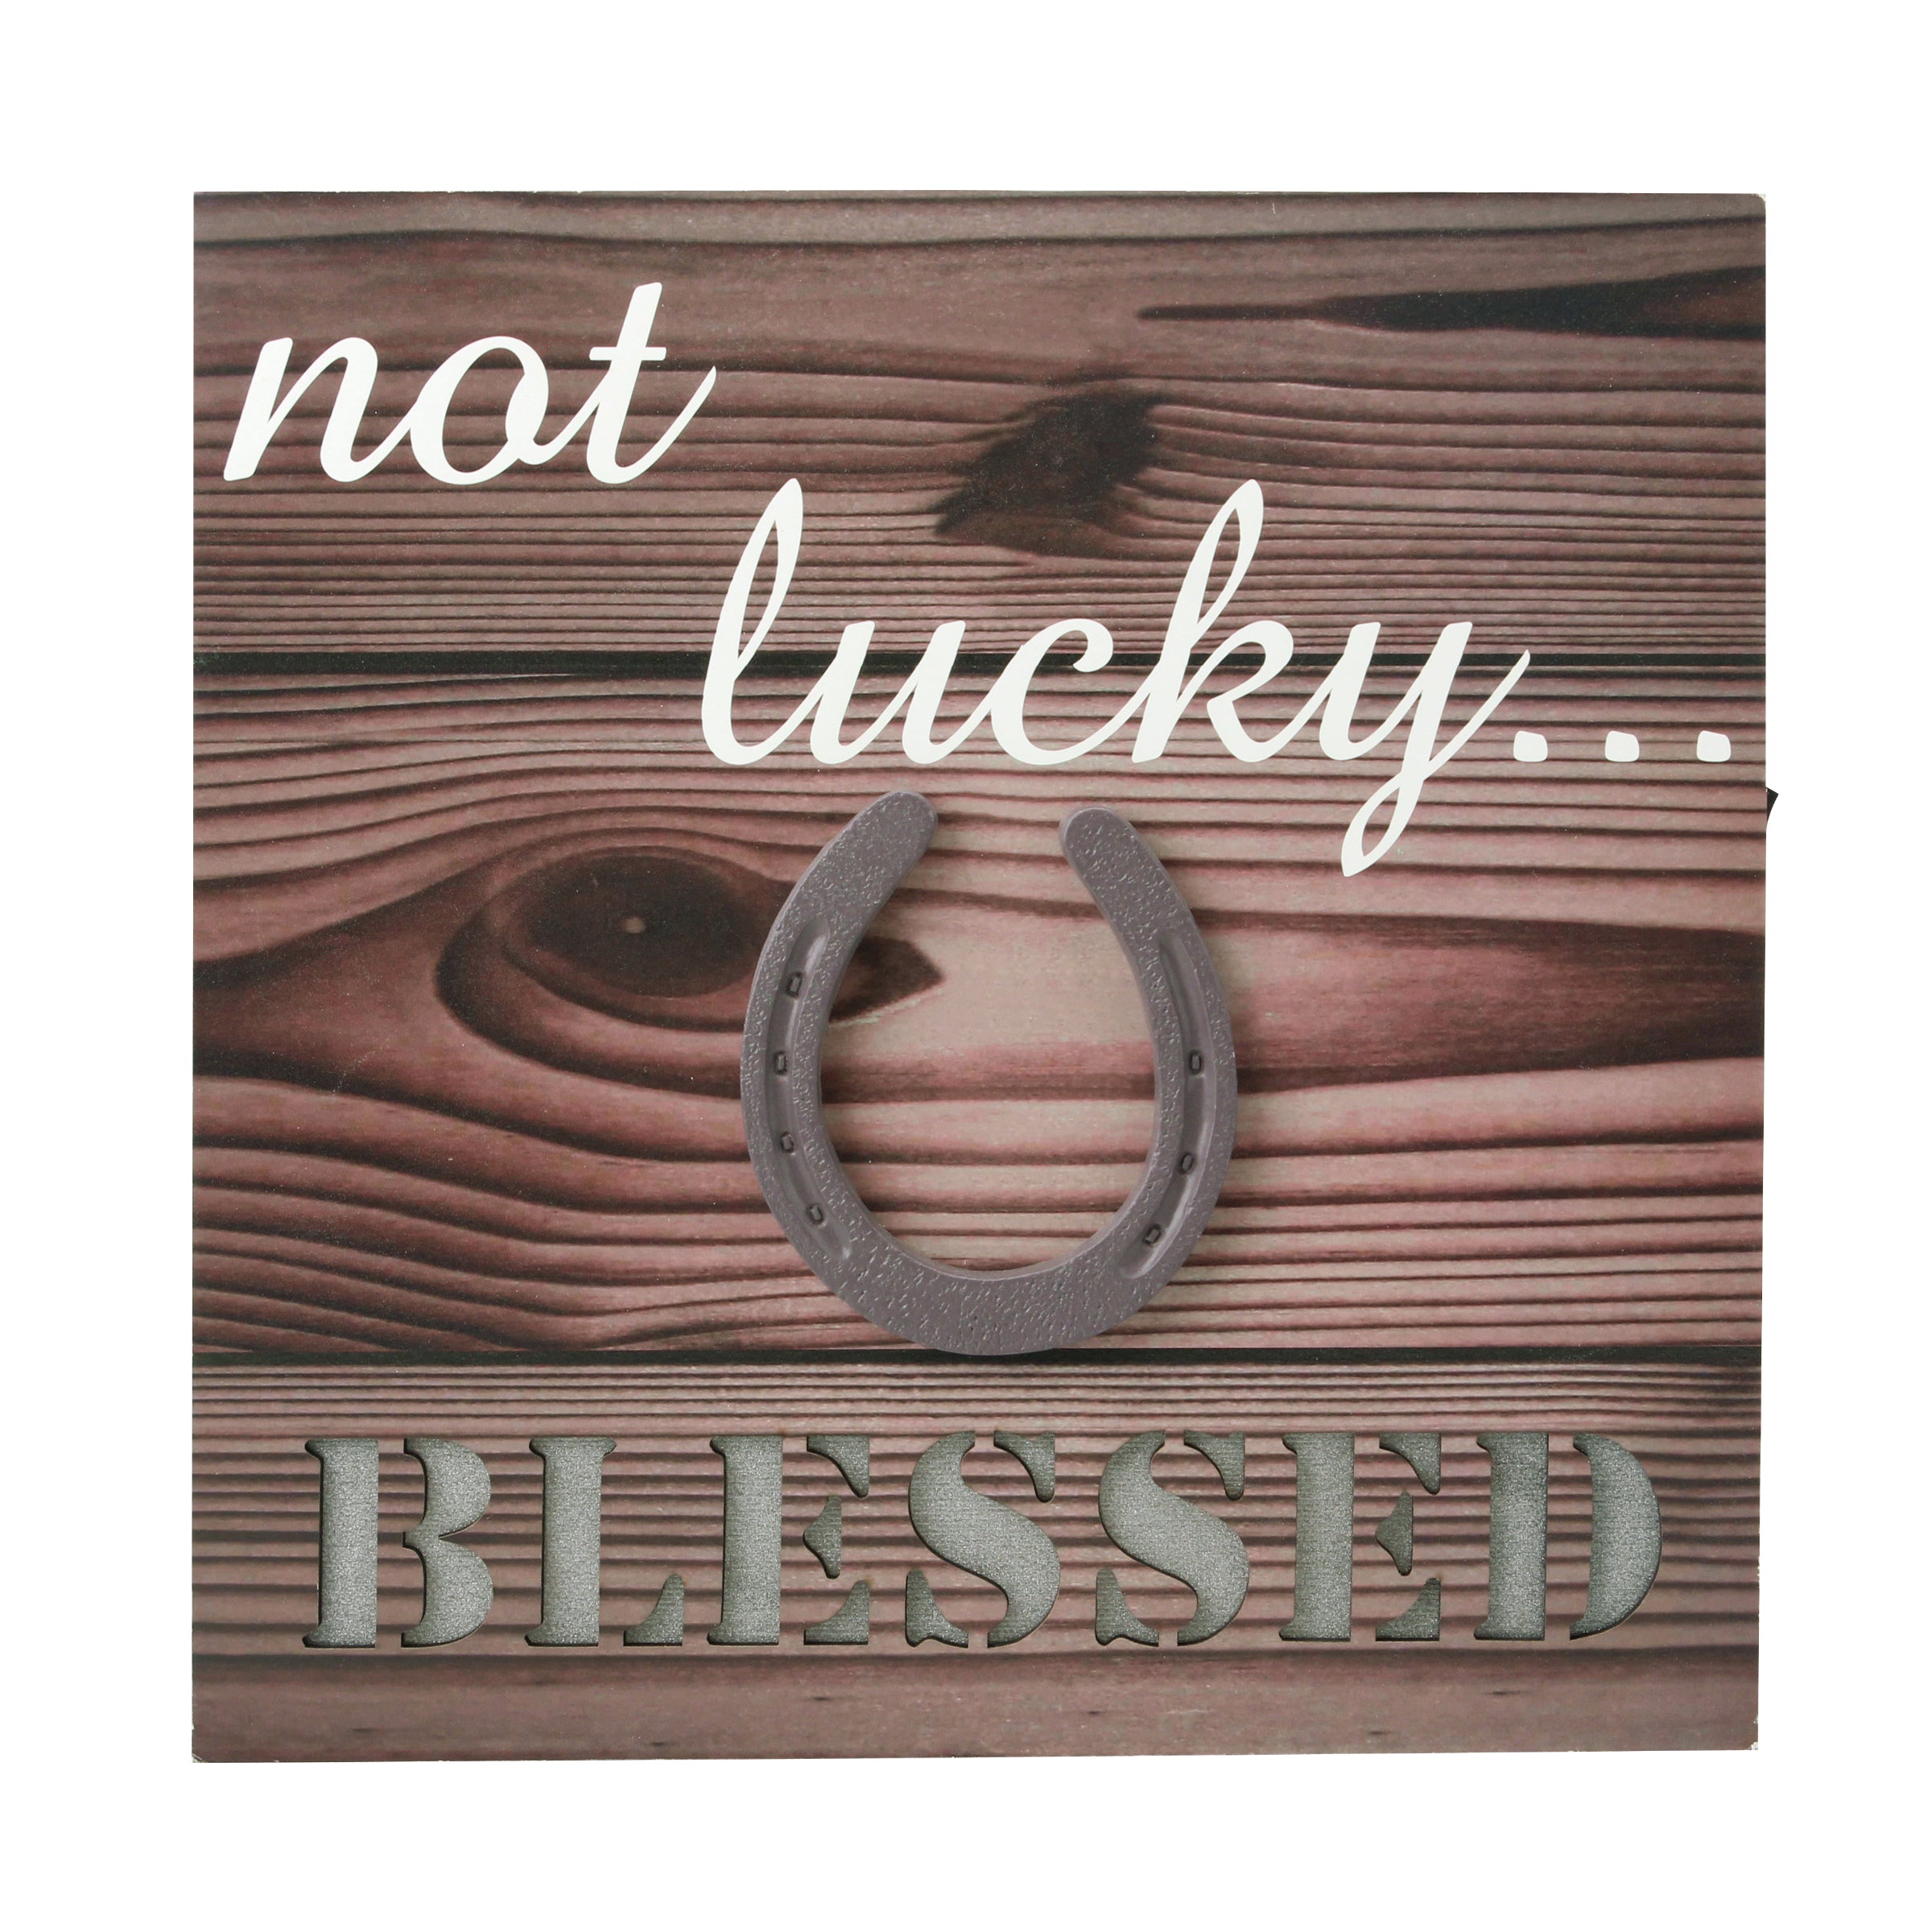 LED NOT LUCKY…..BLESSED Wall Art w/ Horseshoe Detail